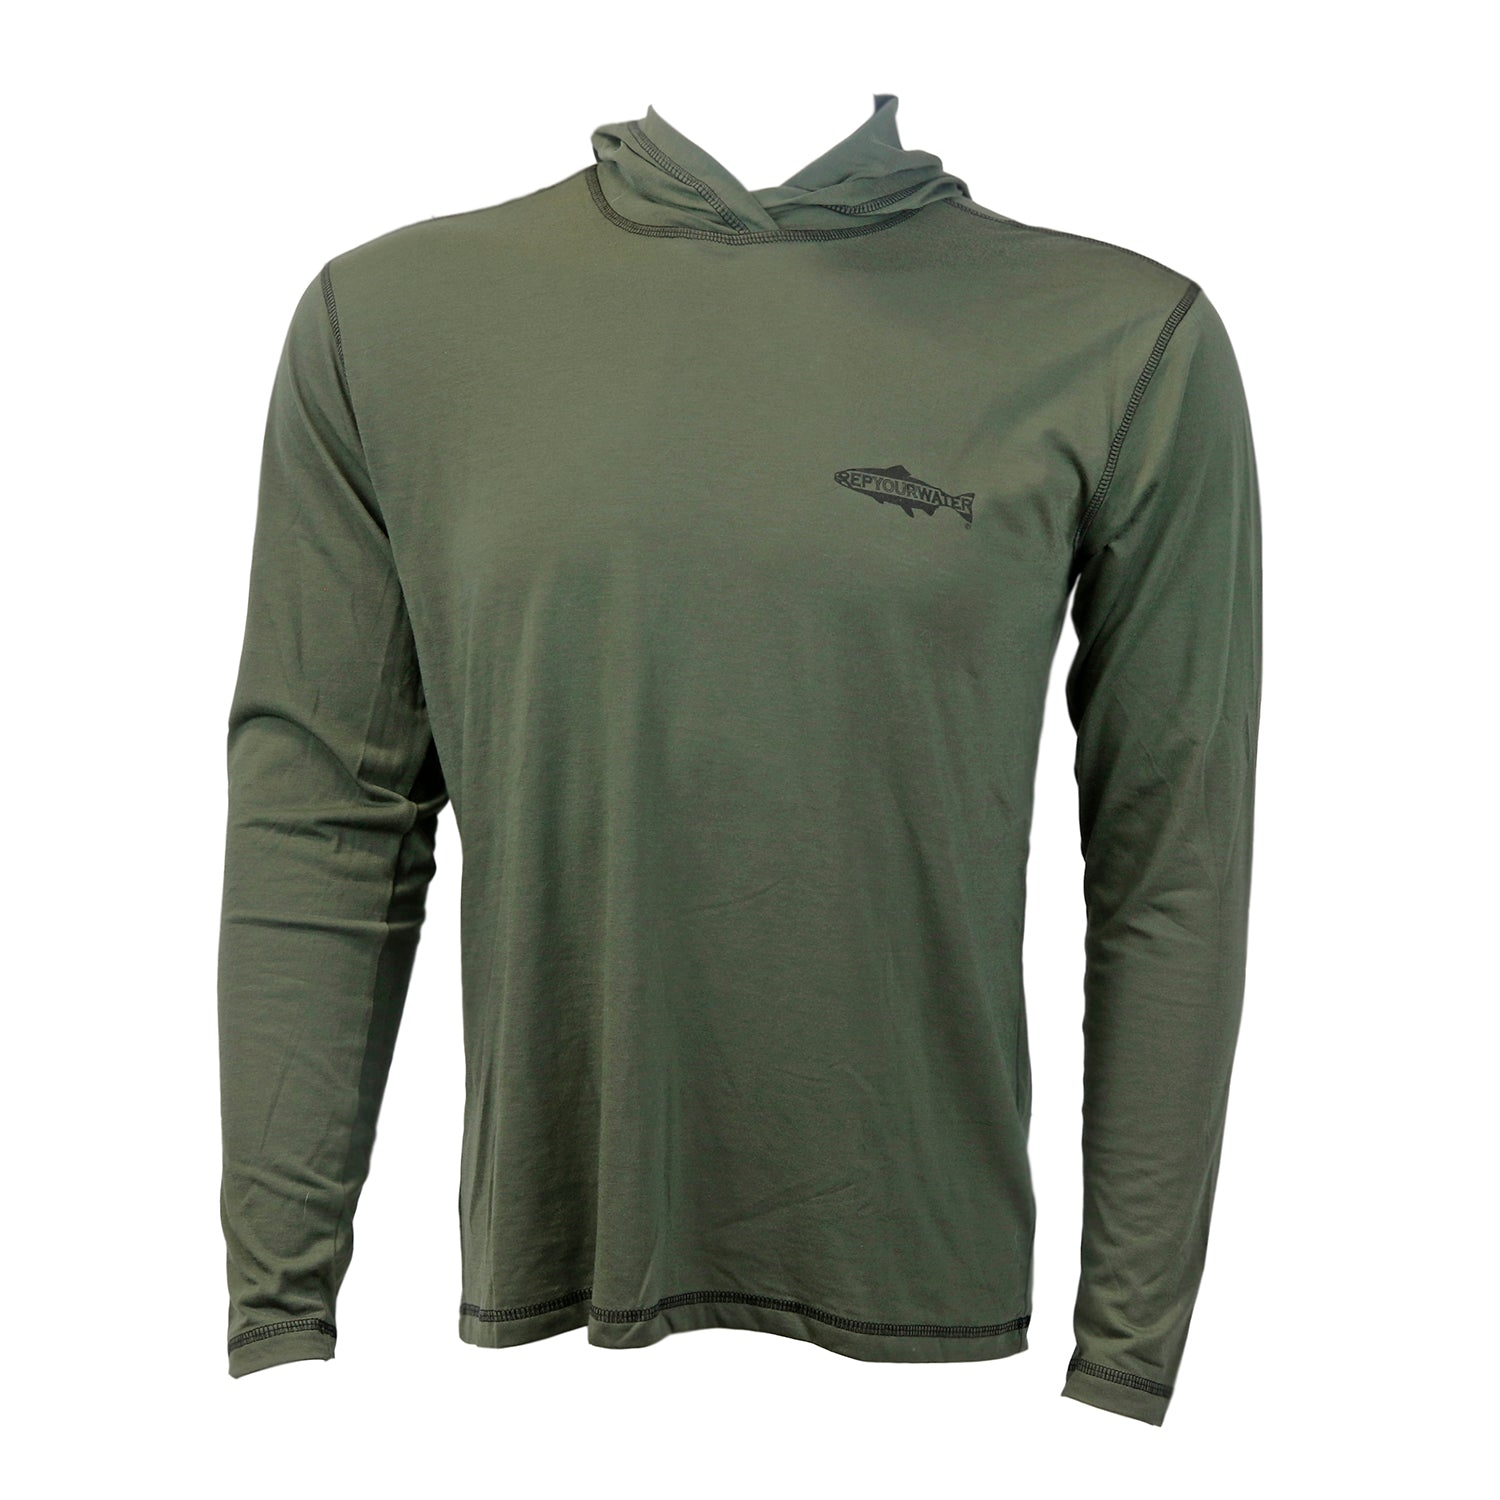 A green longsleeved shirt shown in the front with a hood back and a logo that says repyourwater inside a trout silhouette on the chest